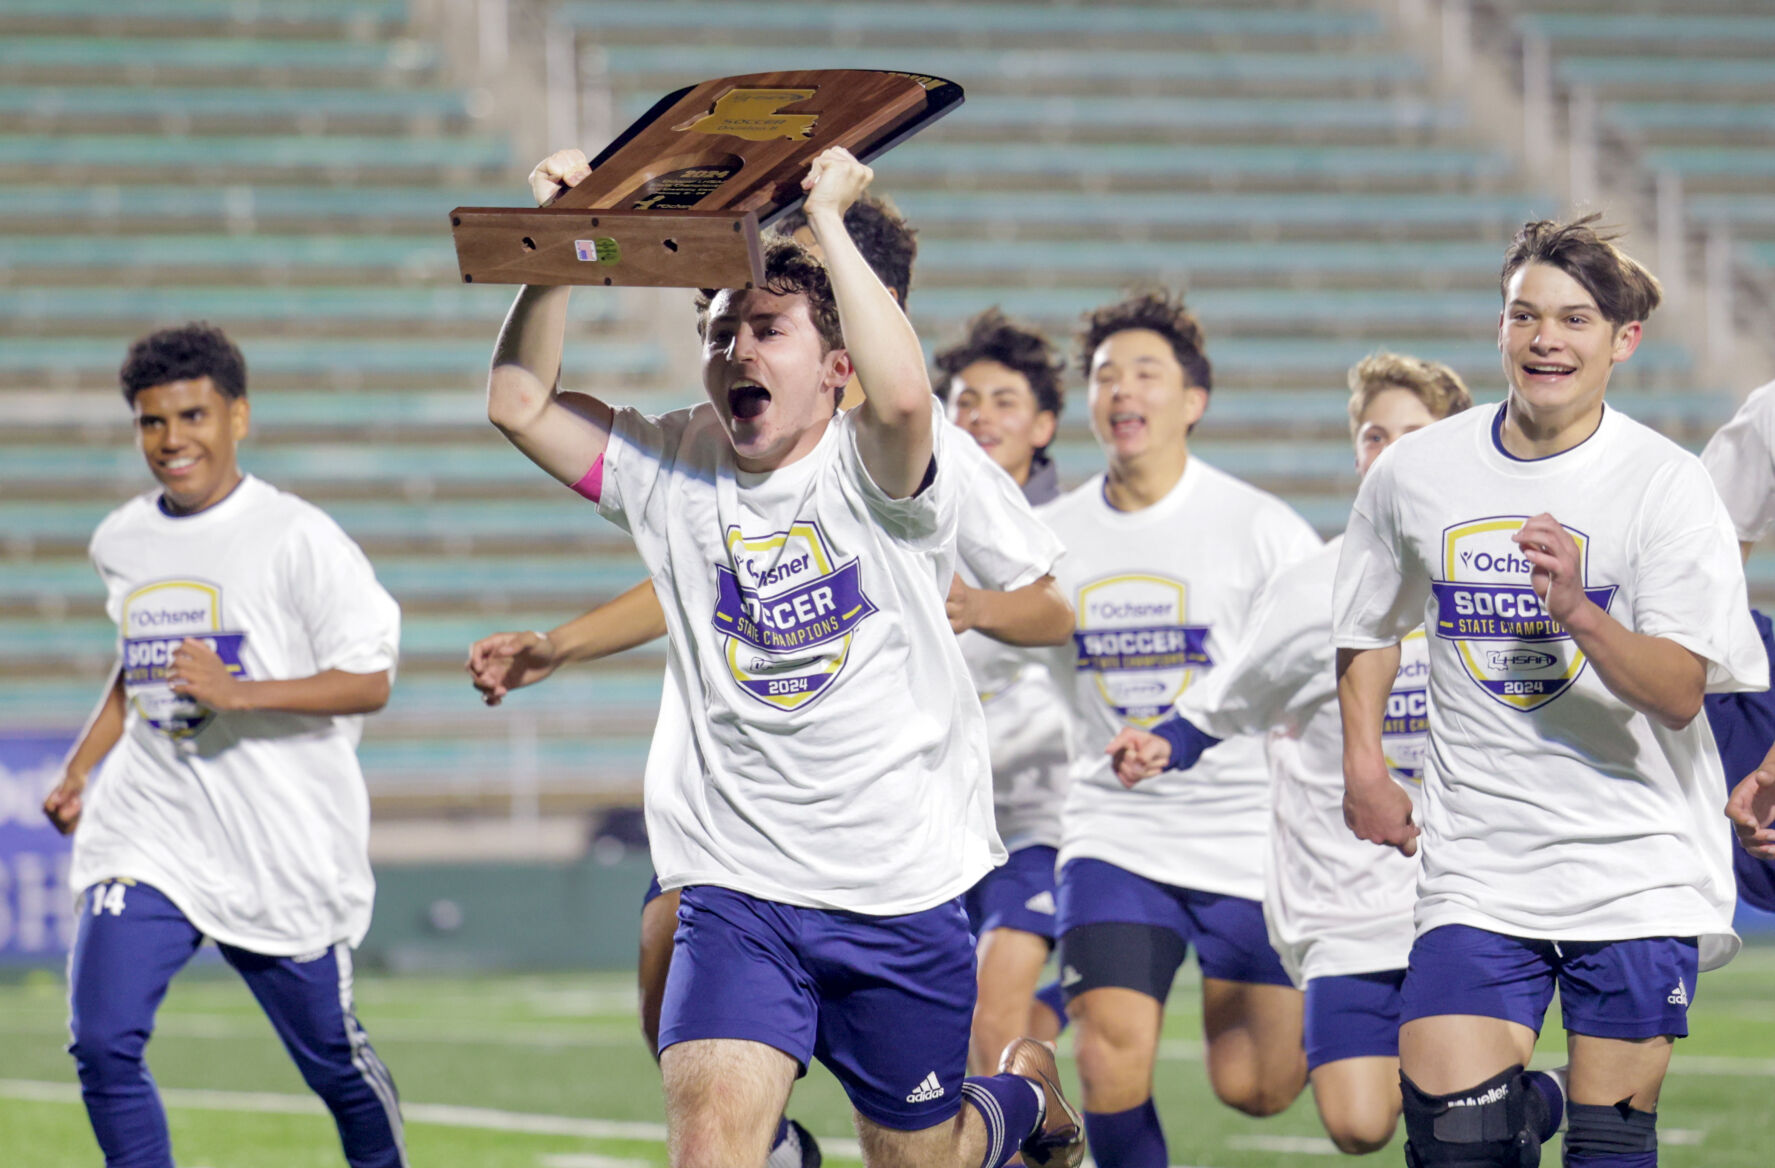 Holy Cross Clinches First Division II Boys Soccer Title Since 2018 with Help of Own Goal by Ben Franklin